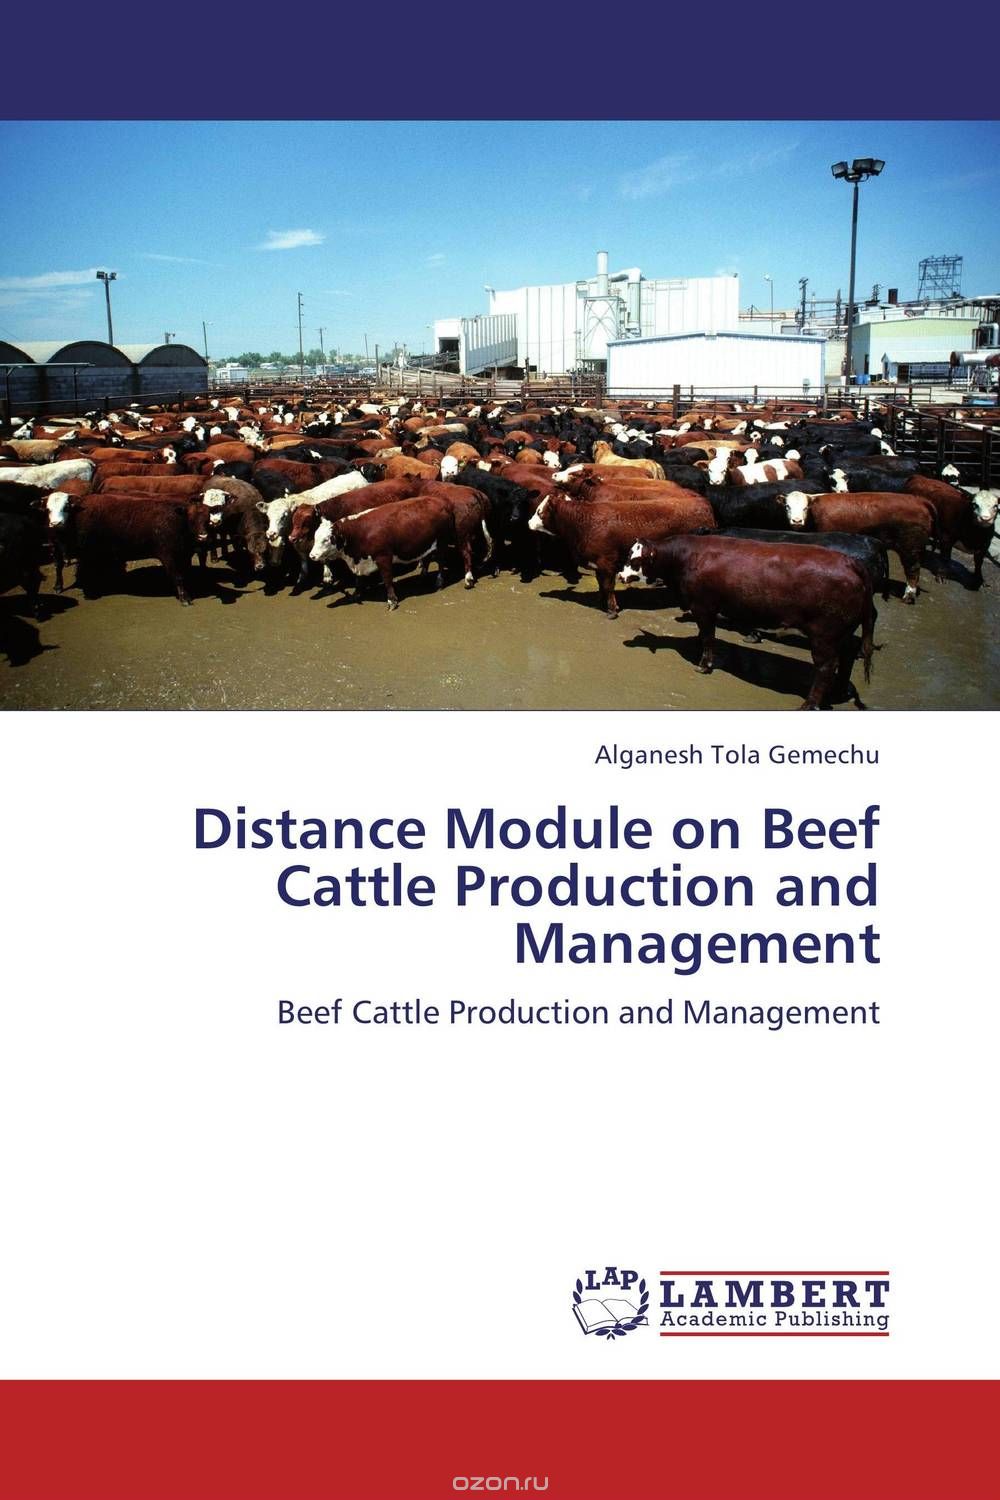 Distance Module on Beef Cattle Production and Management